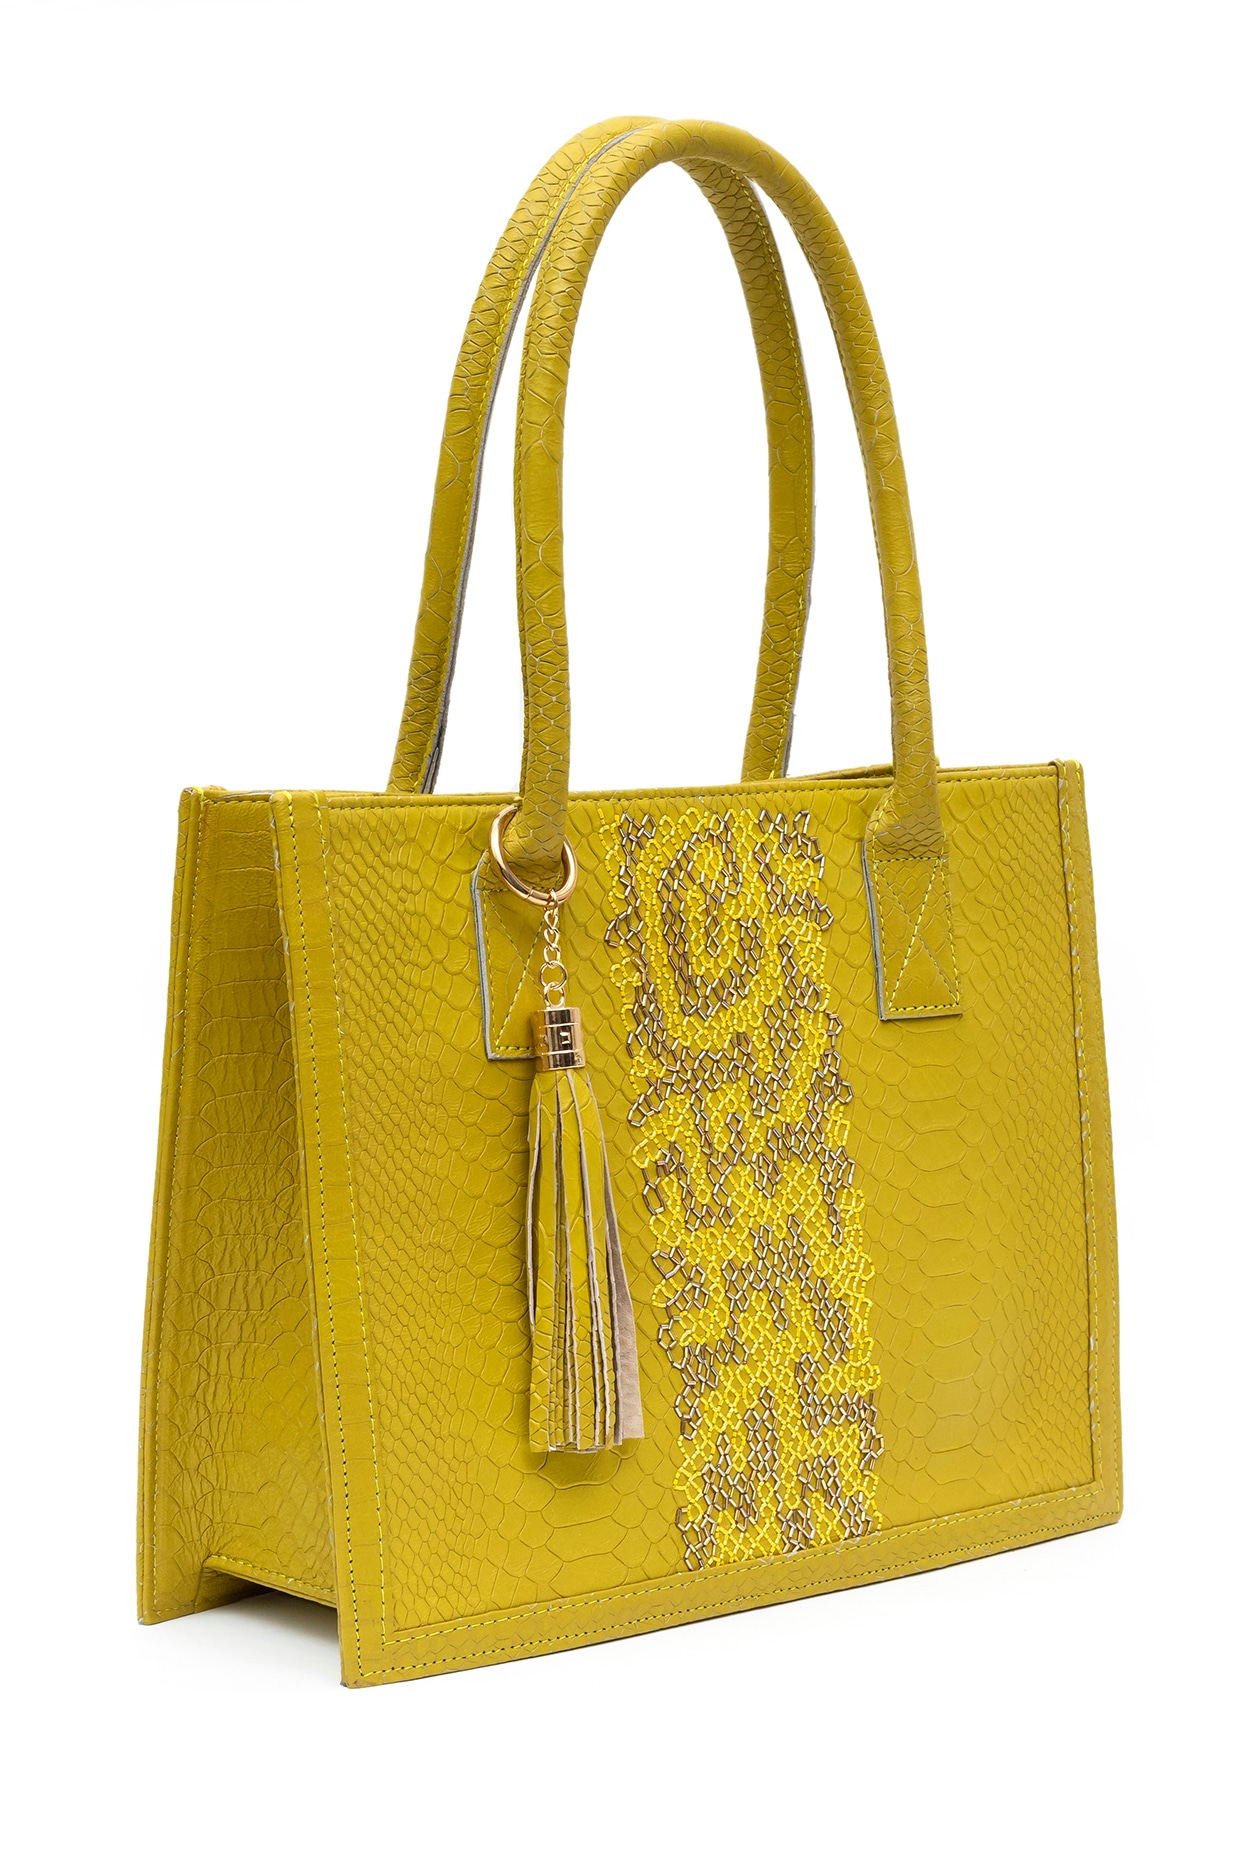 SYGA Yellow Sling Bag Leather Purse Mini Shoulder Bag with Strap Card Slots  (Yellow, Forever Lovely) Women Phone Bag Ladies Wallet - Price in India |  Flipkart.com